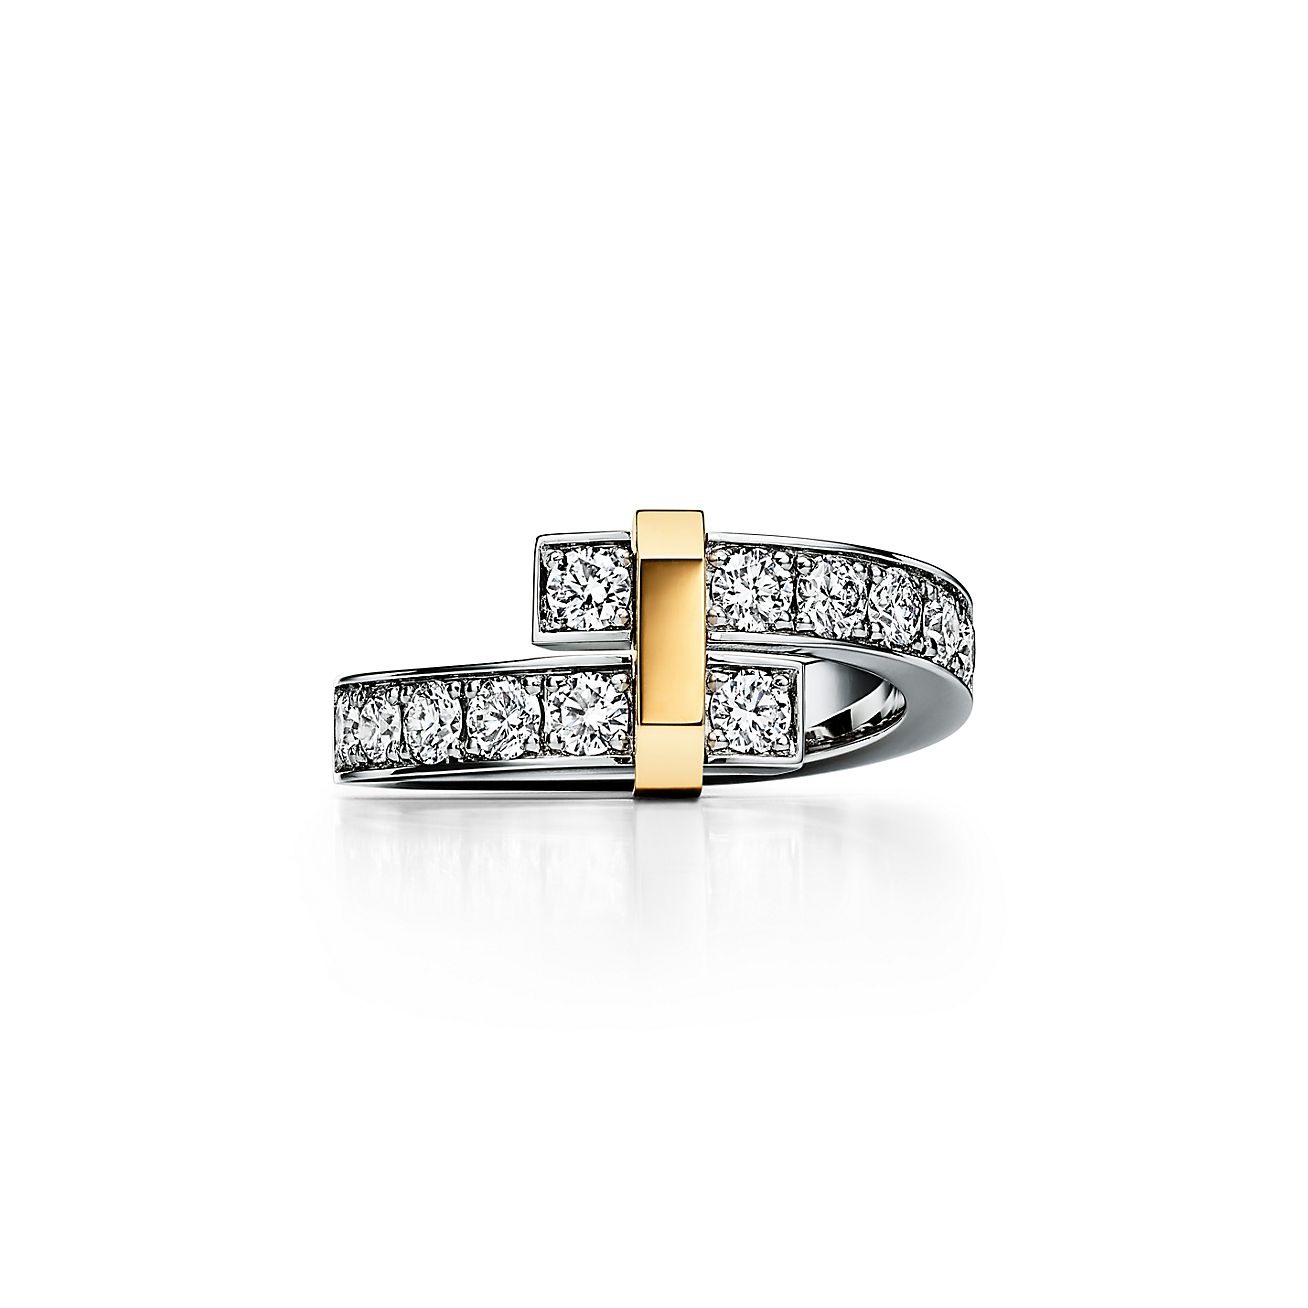 Tiffany Edge Bypass Ring in Platinum and Yellow Gold with